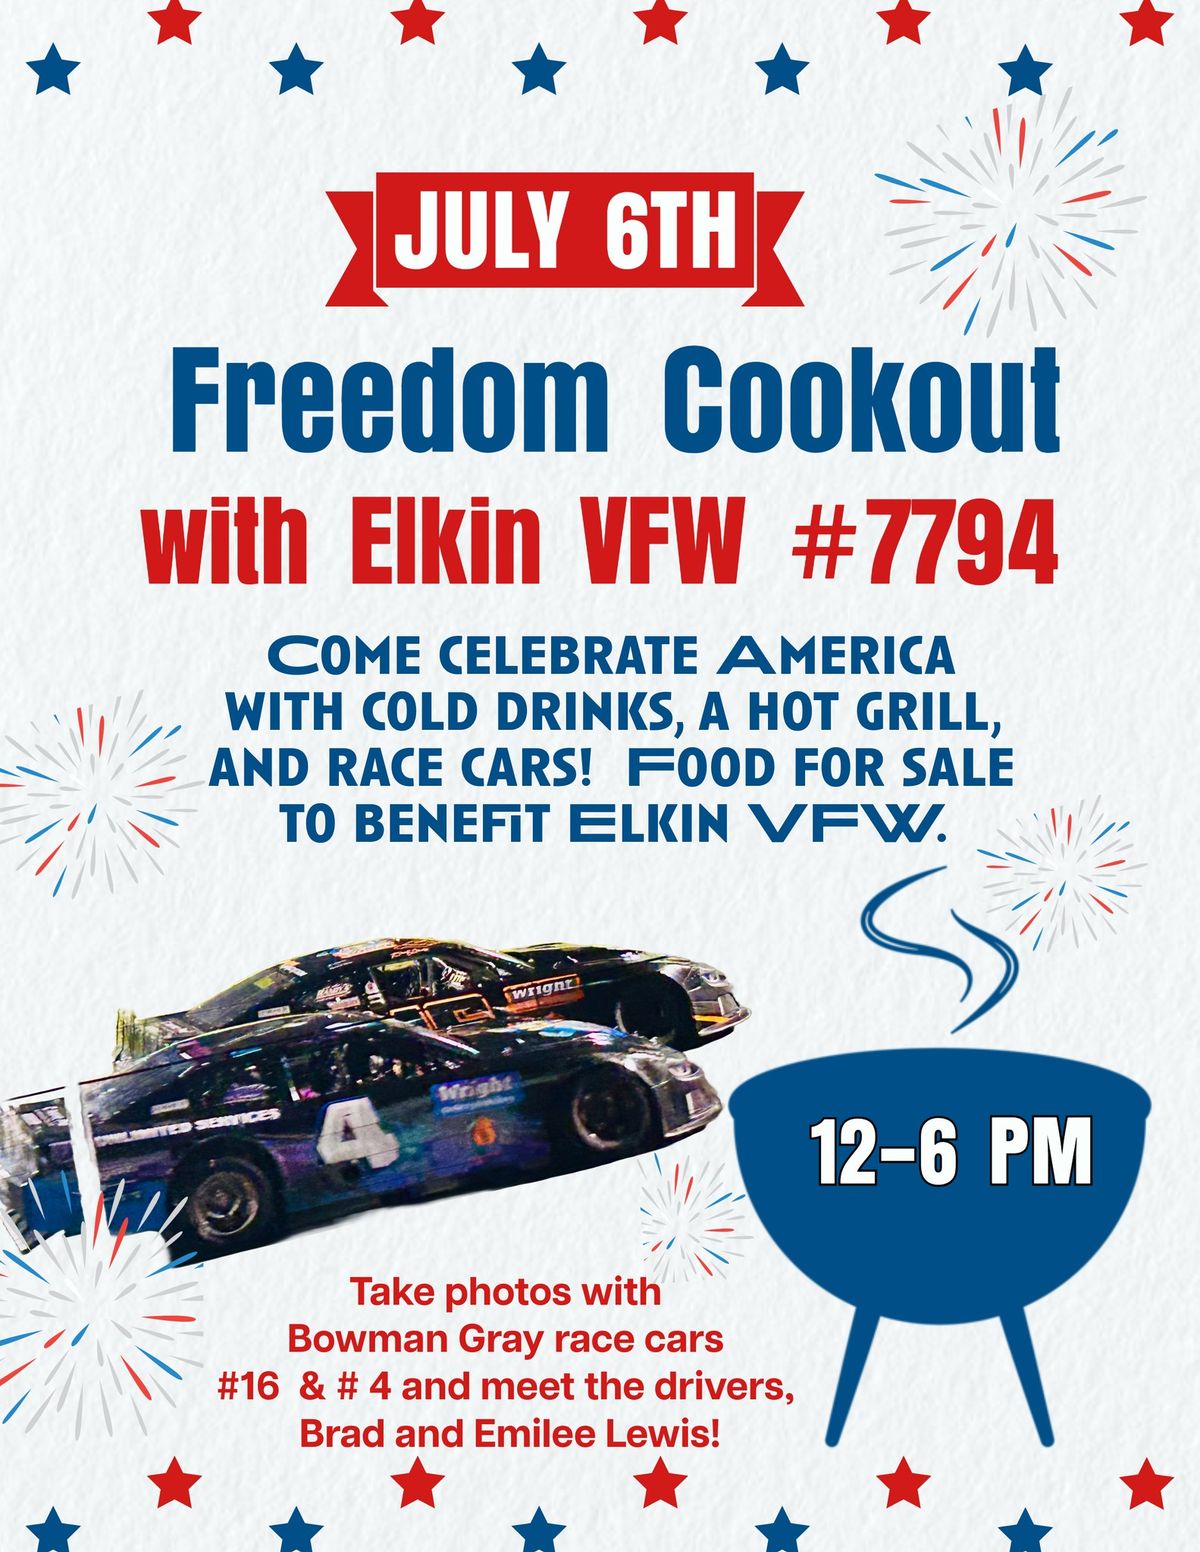 Freedom Cookout with Elkin VFW 